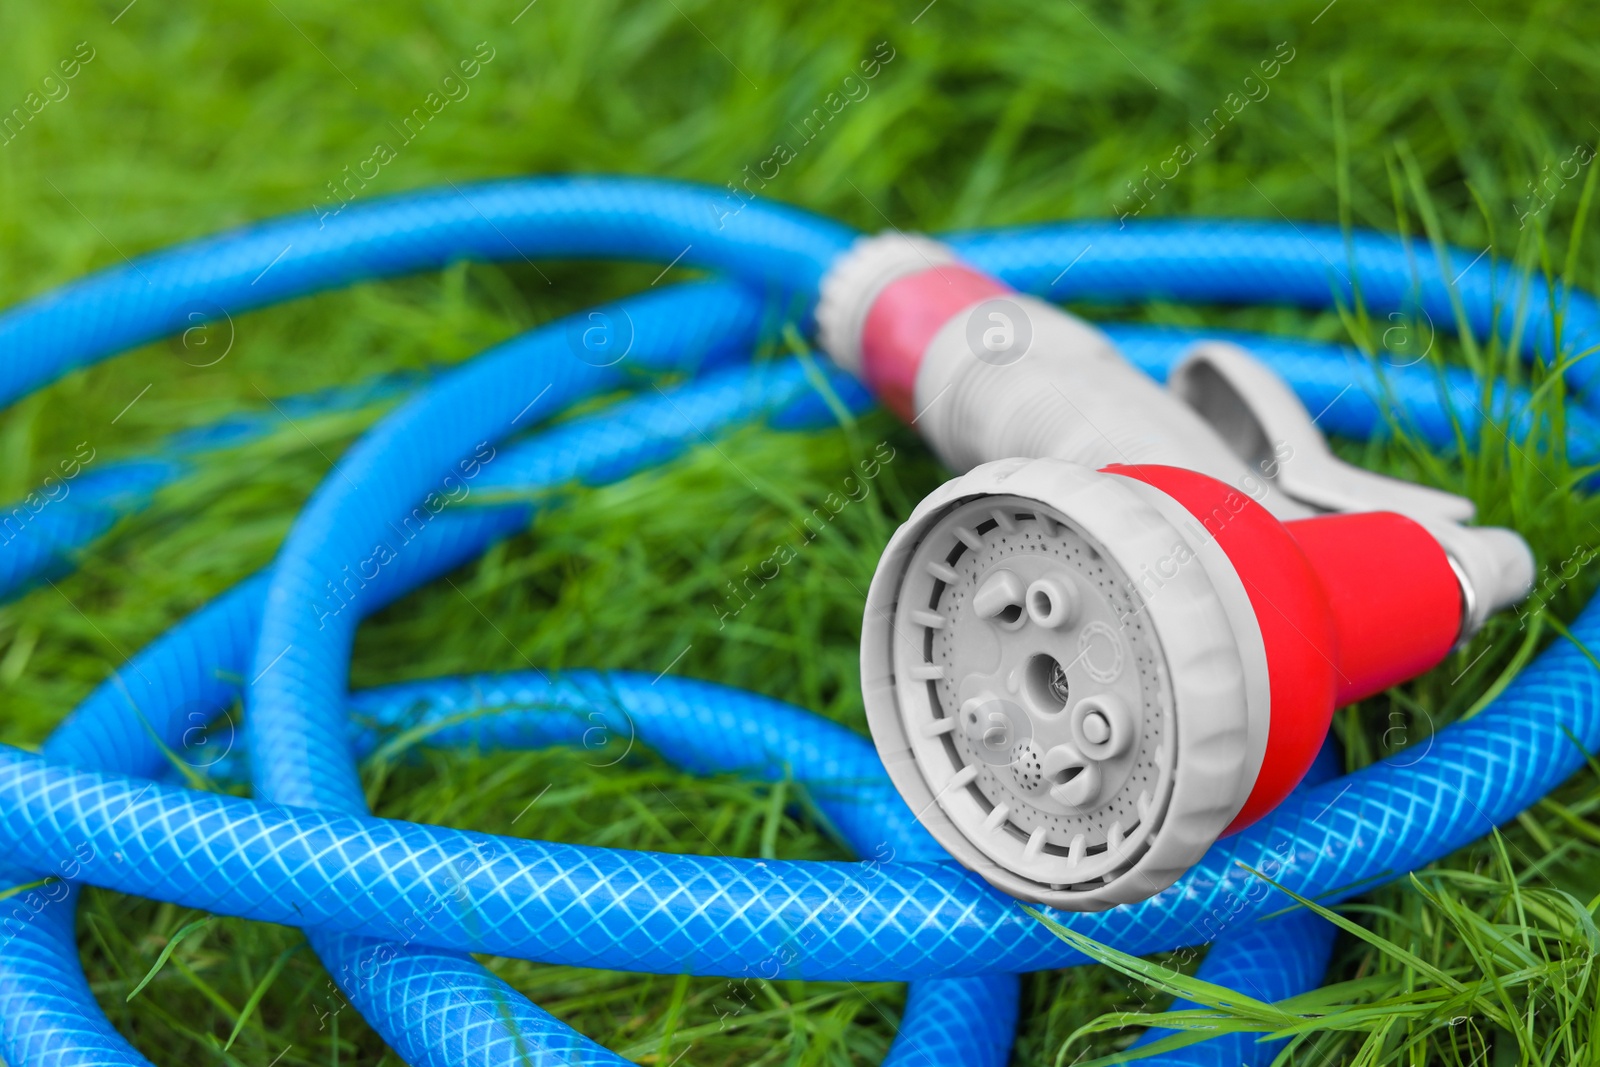 Photo of Watering hose with sprinkler on green grass outdoors, closeup